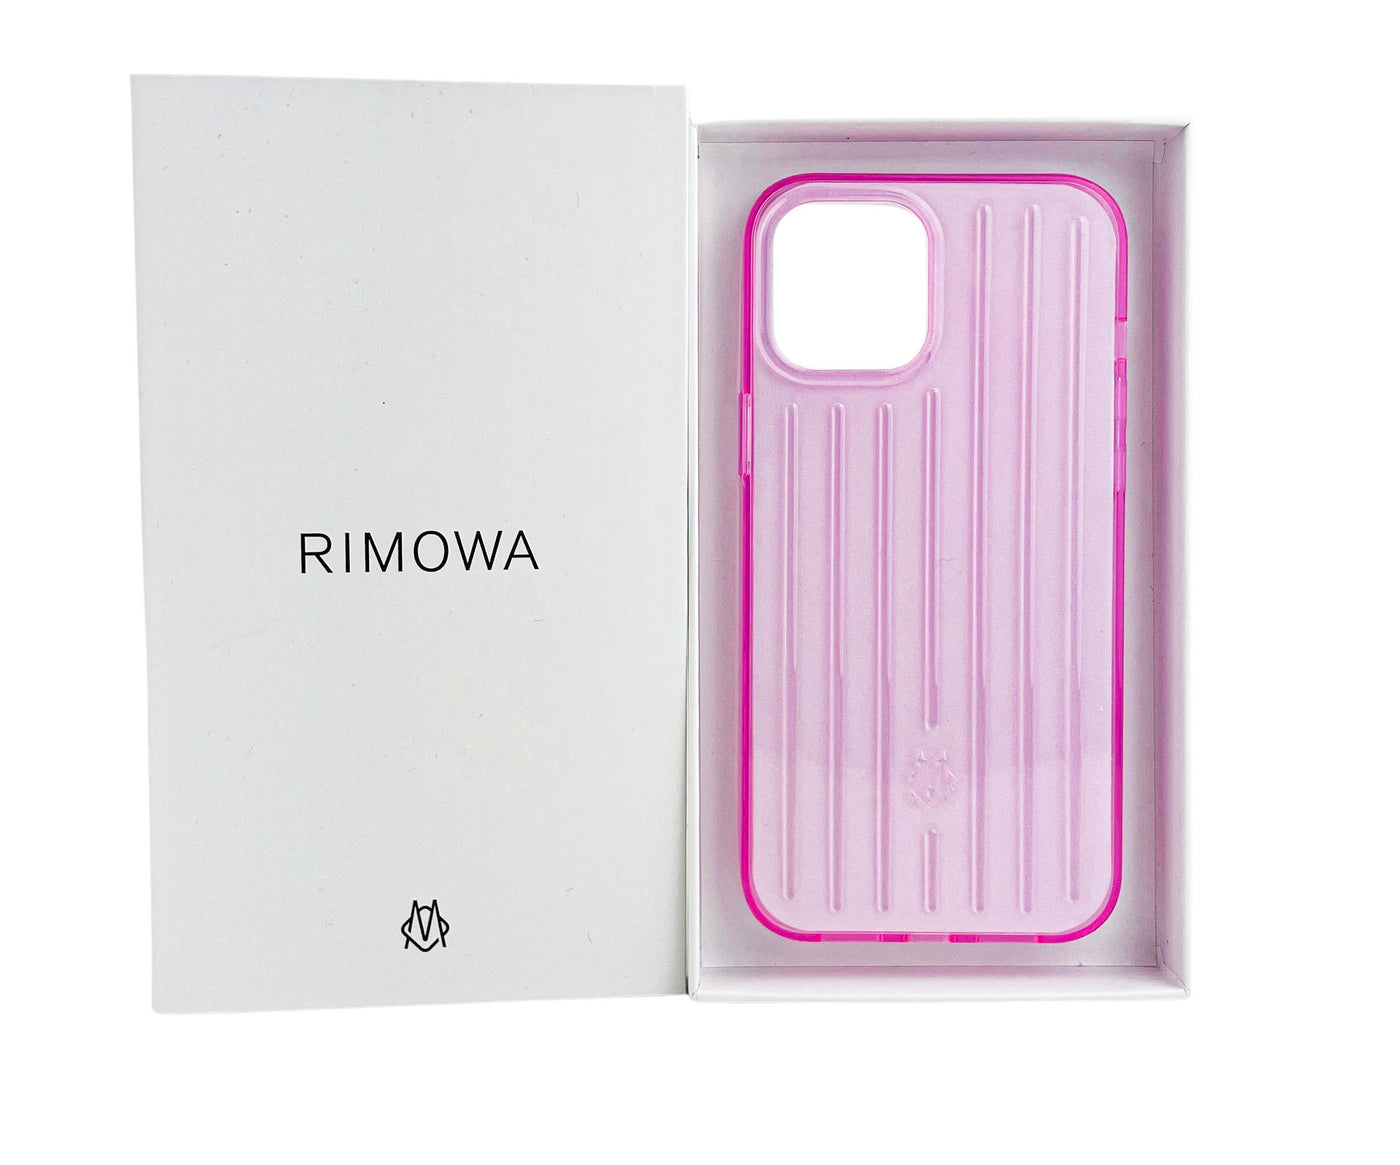 RIMOWA iPhone 12/12 Pro Phone Case in Fluorescent Pink - Discounts on RIMOWA at UAL